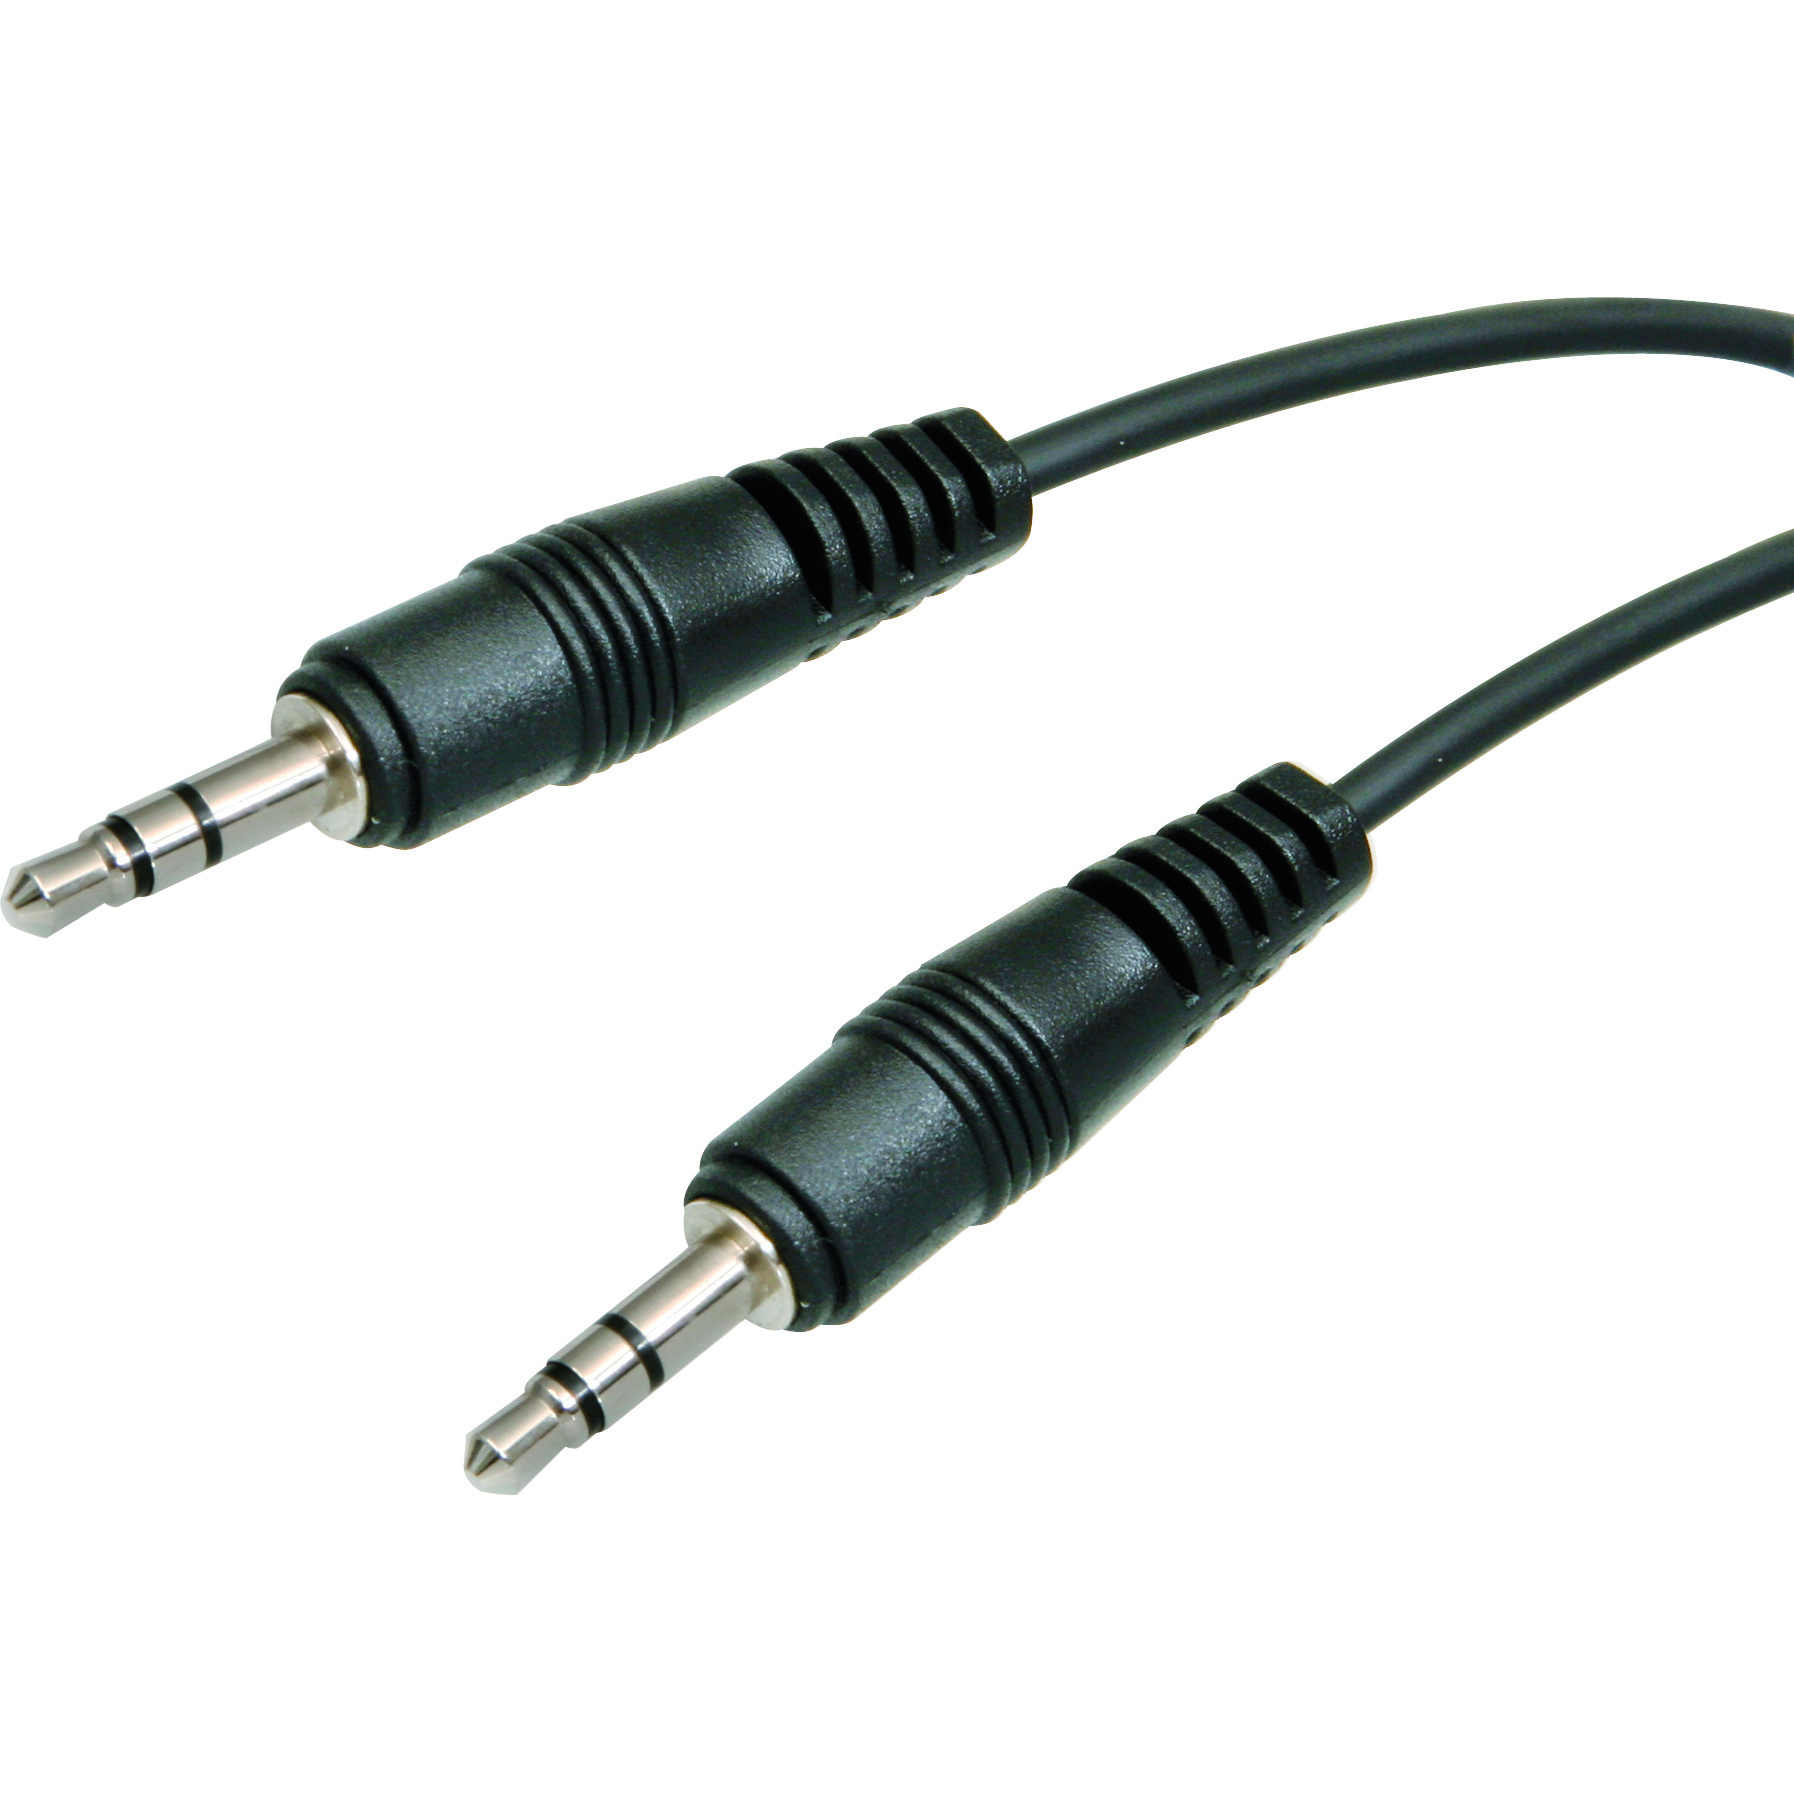 Audio Jack (Male to Male) Cable 2M - Ireland